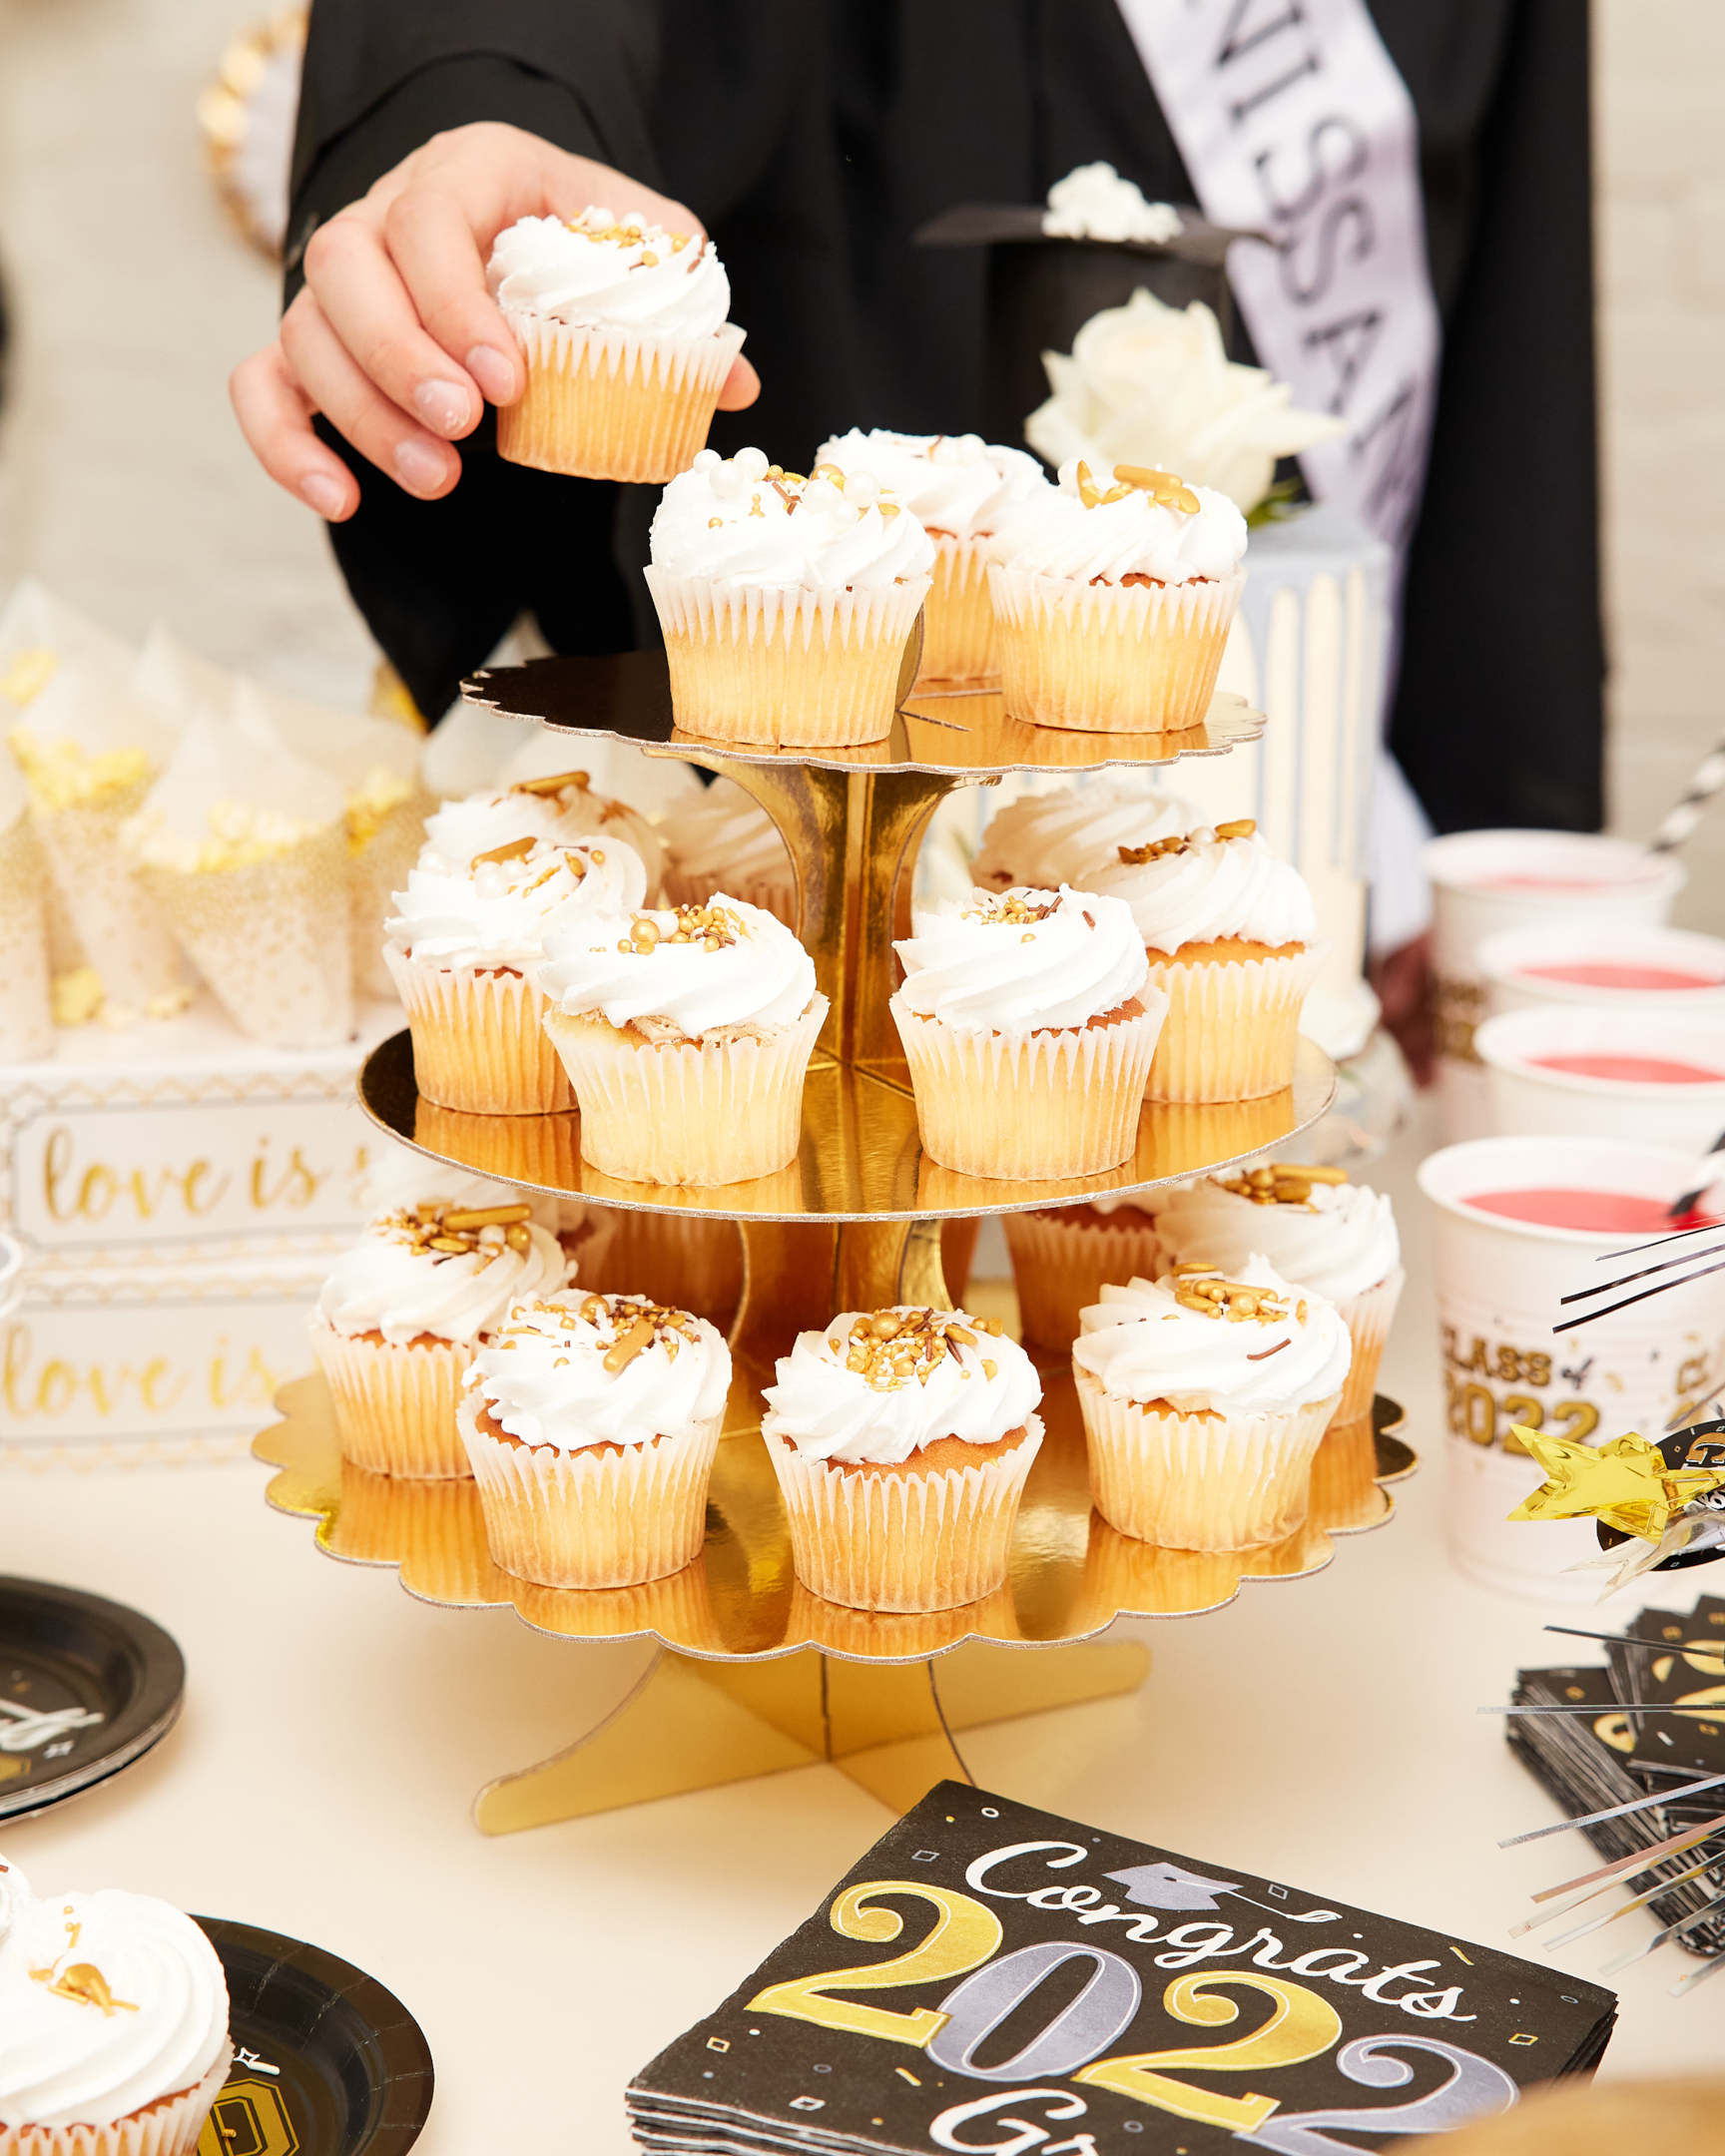 Graduation Party Idea #8:  Bake something sweet like cupcakes or a themed cake.